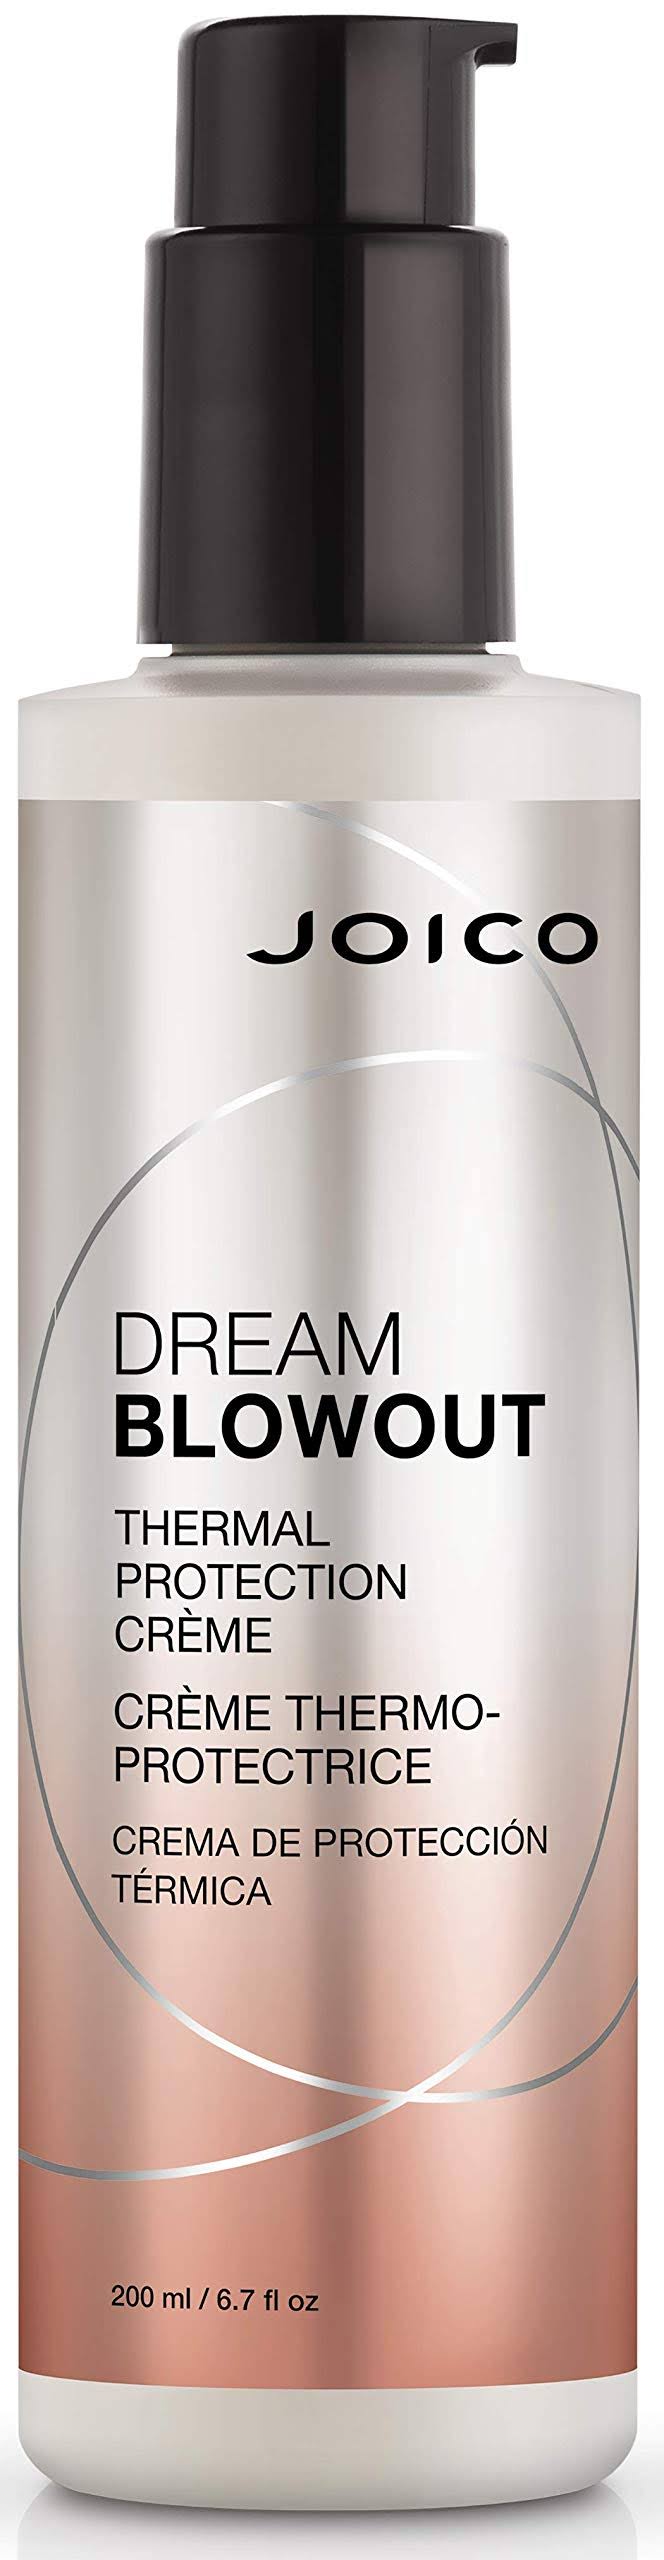 Joico Dream Blowout Thermal Protection Creme - 6.7 oz